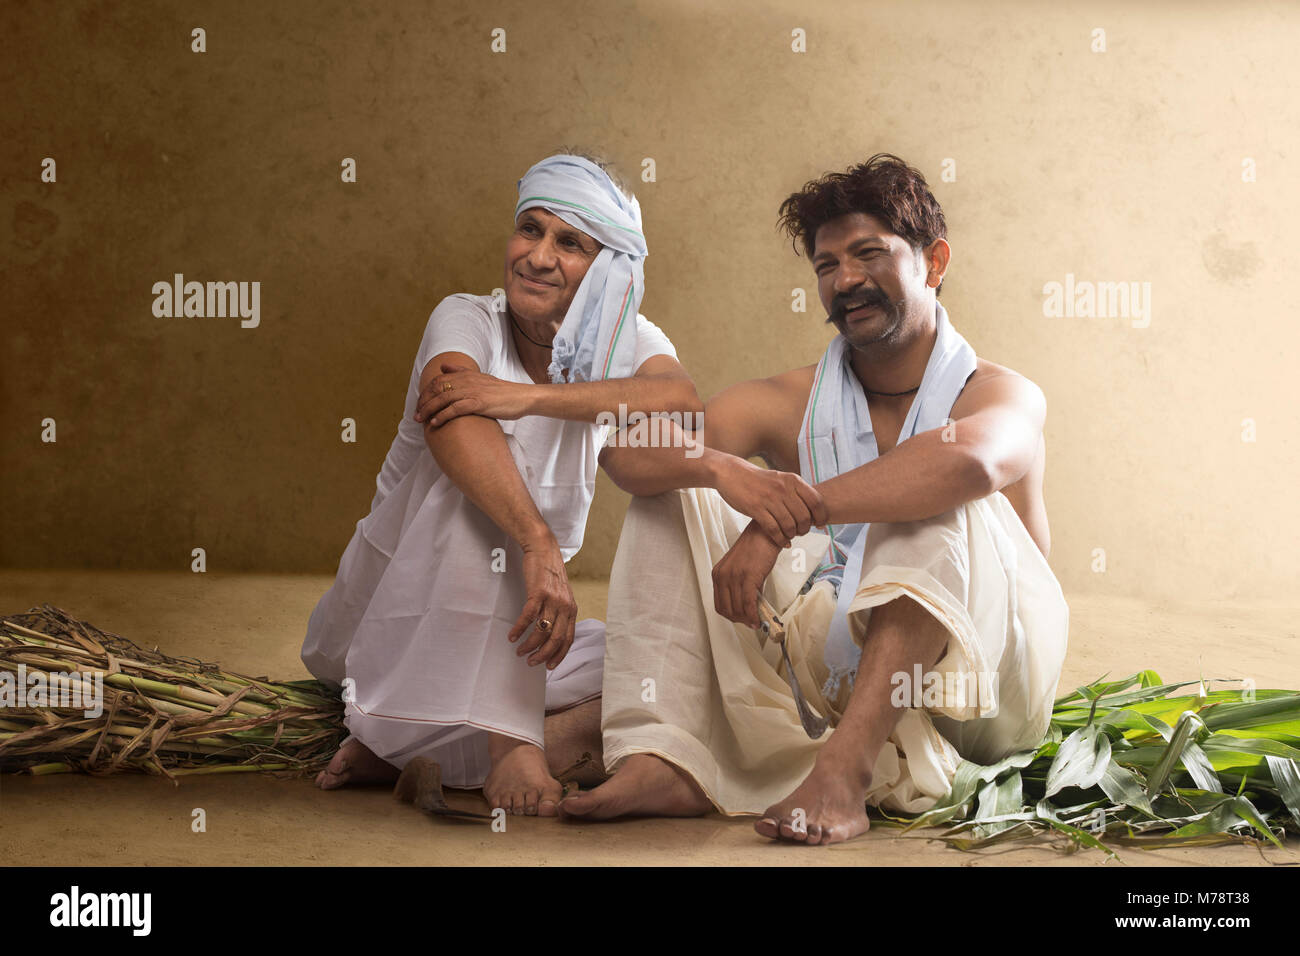 Two Indian farmer sitting together Stock Photo